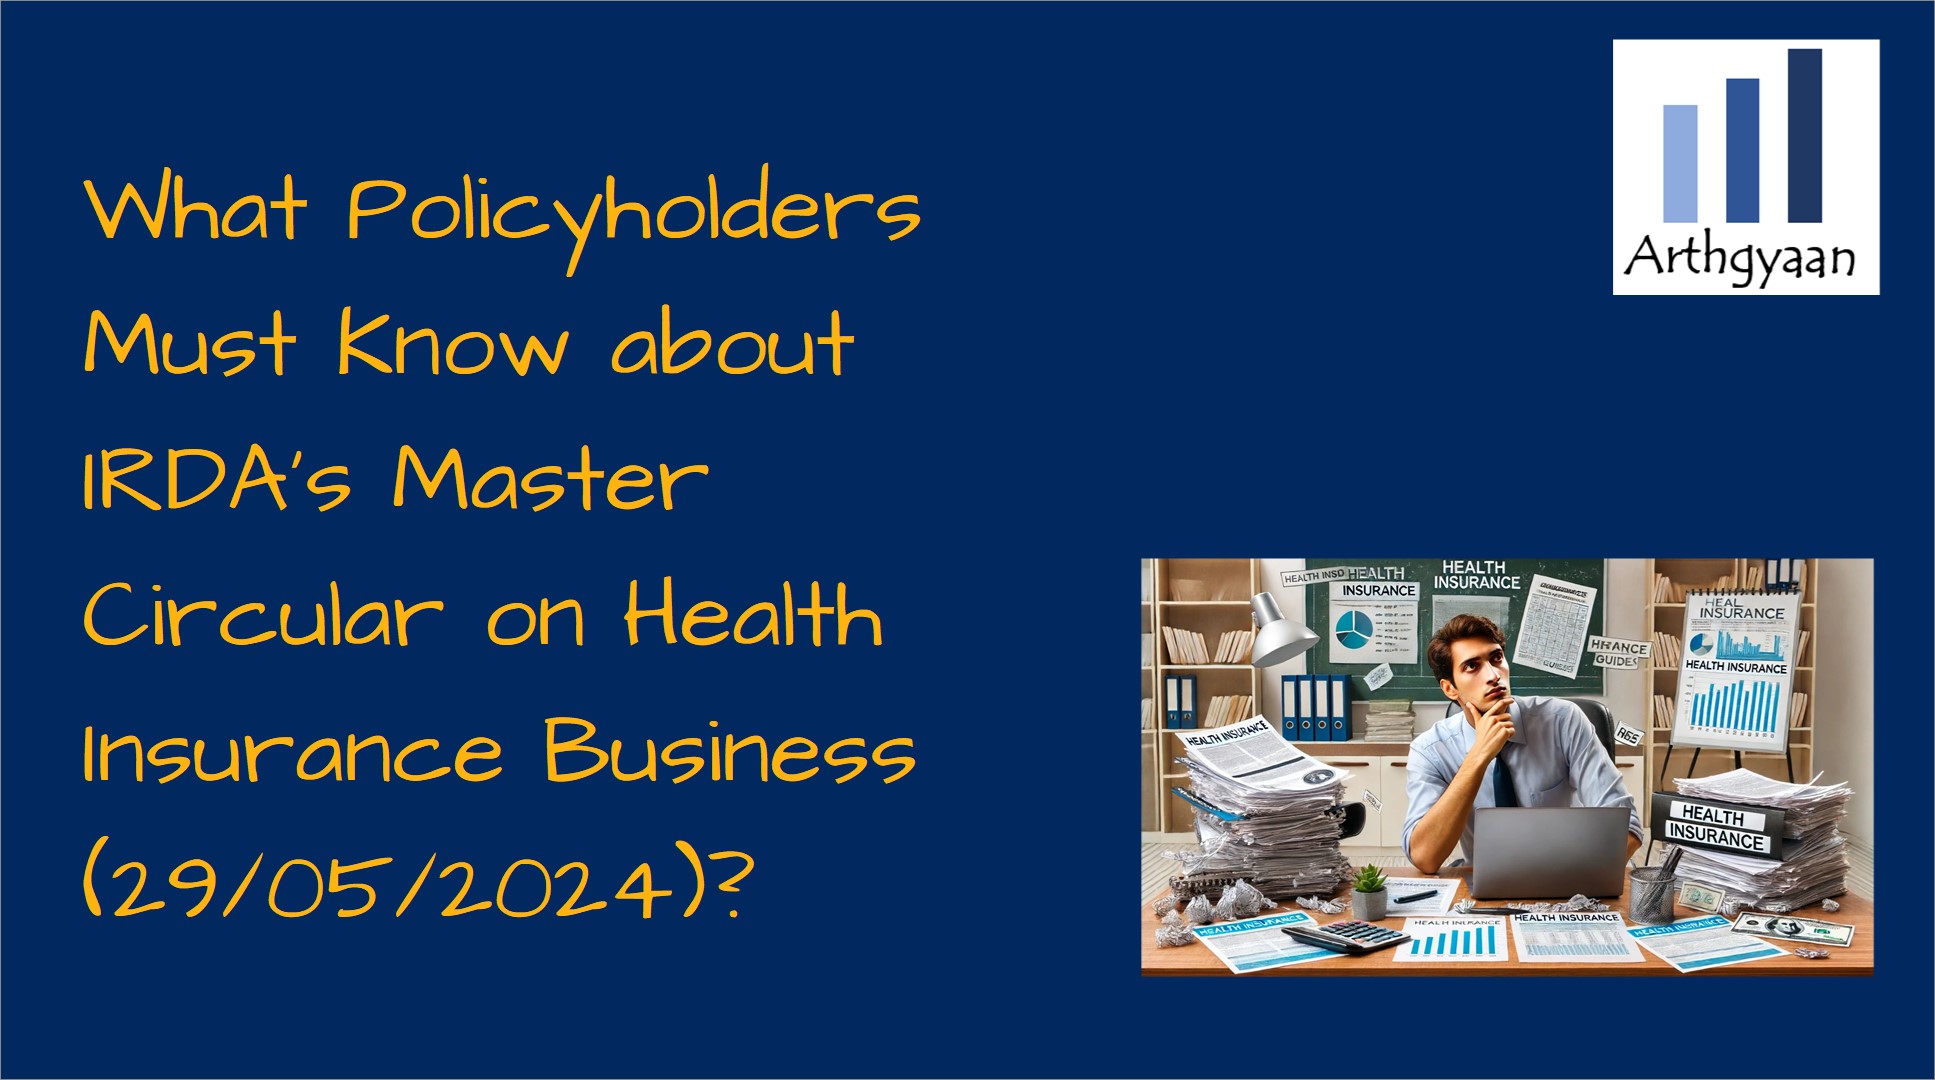 What Policyholders Must Know about IRDA's Master Circular on Health Insurance Business (29/05/2024)?